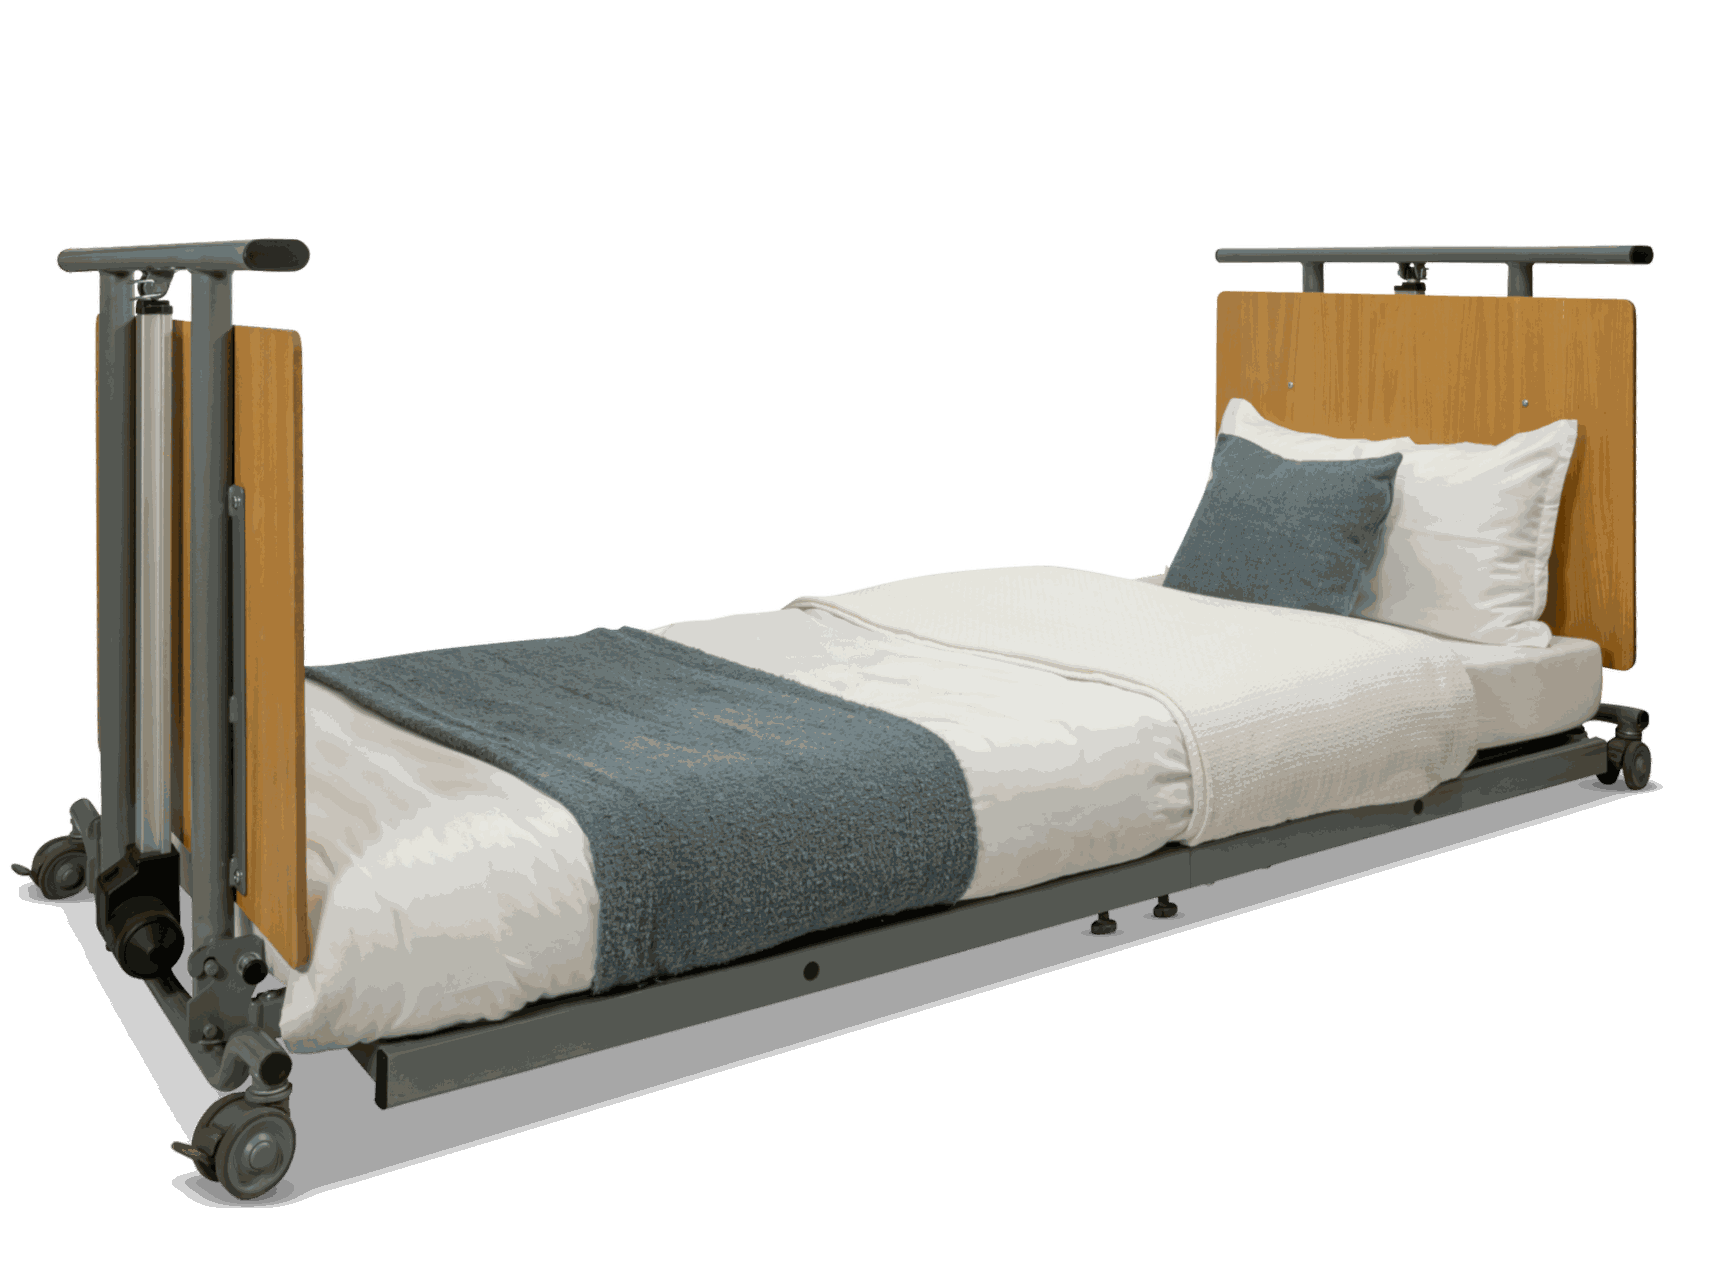 Low Hospital Bed